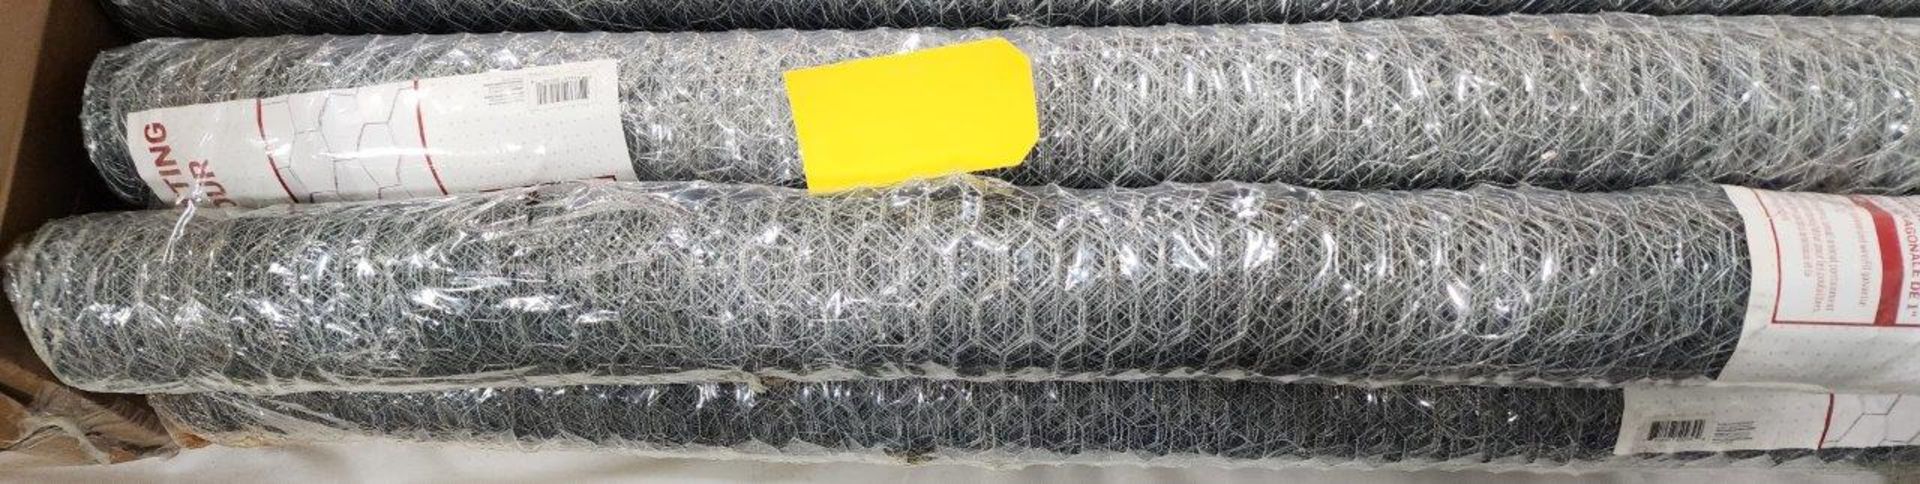 6-ROLLS OF FCL 24" METAL POULTRY NETTING 1"X22GA.X48"X50FT (SOME ROLLS HAVE WATER DAMAGE)